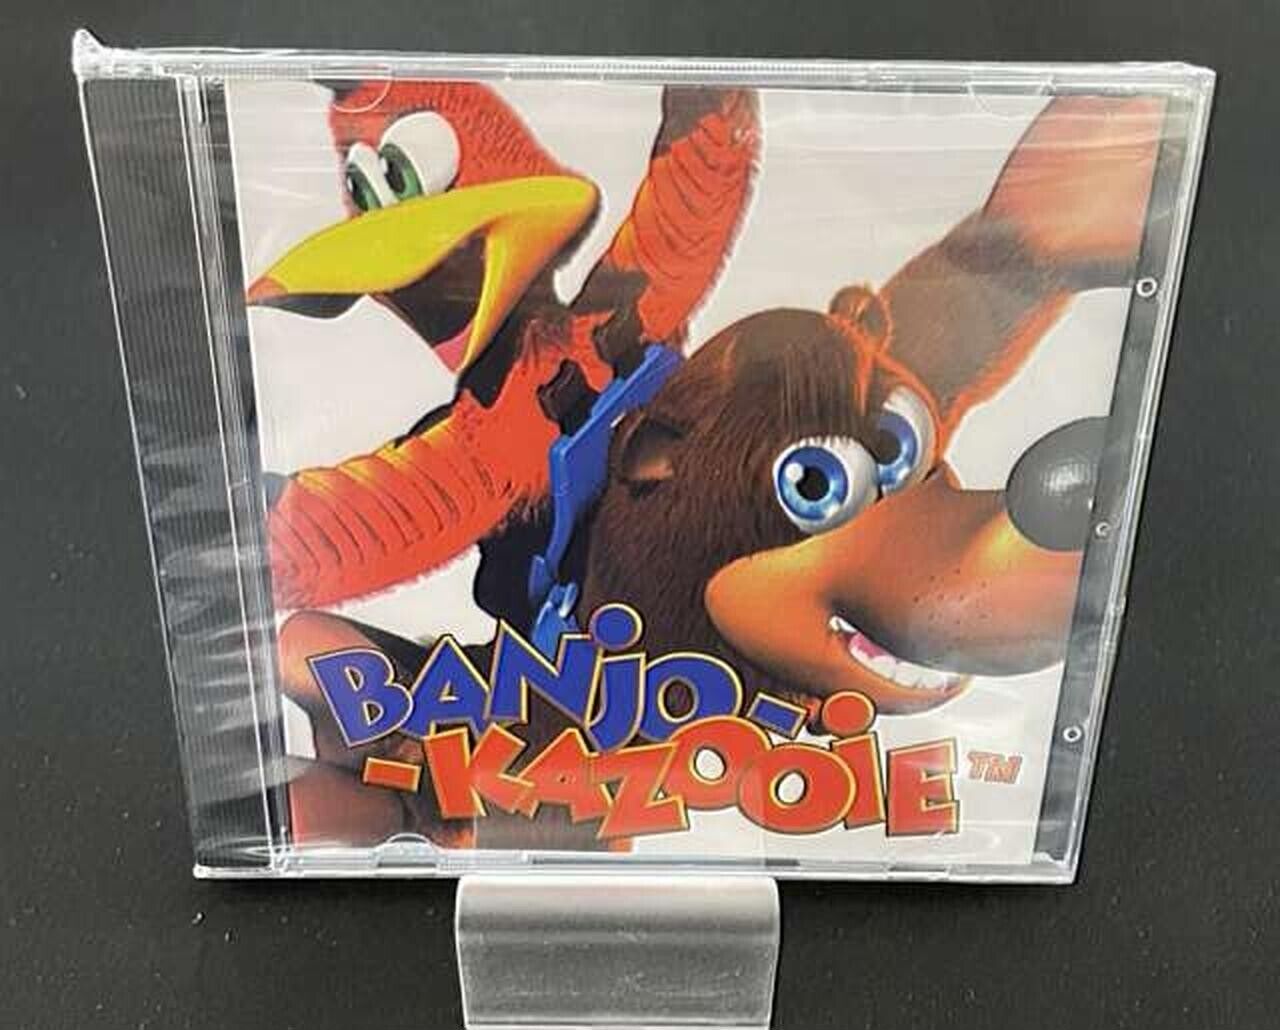 Banjo and Kazooie Official Game Soundtrack CD Nintendo 64 Video Game Music Rare